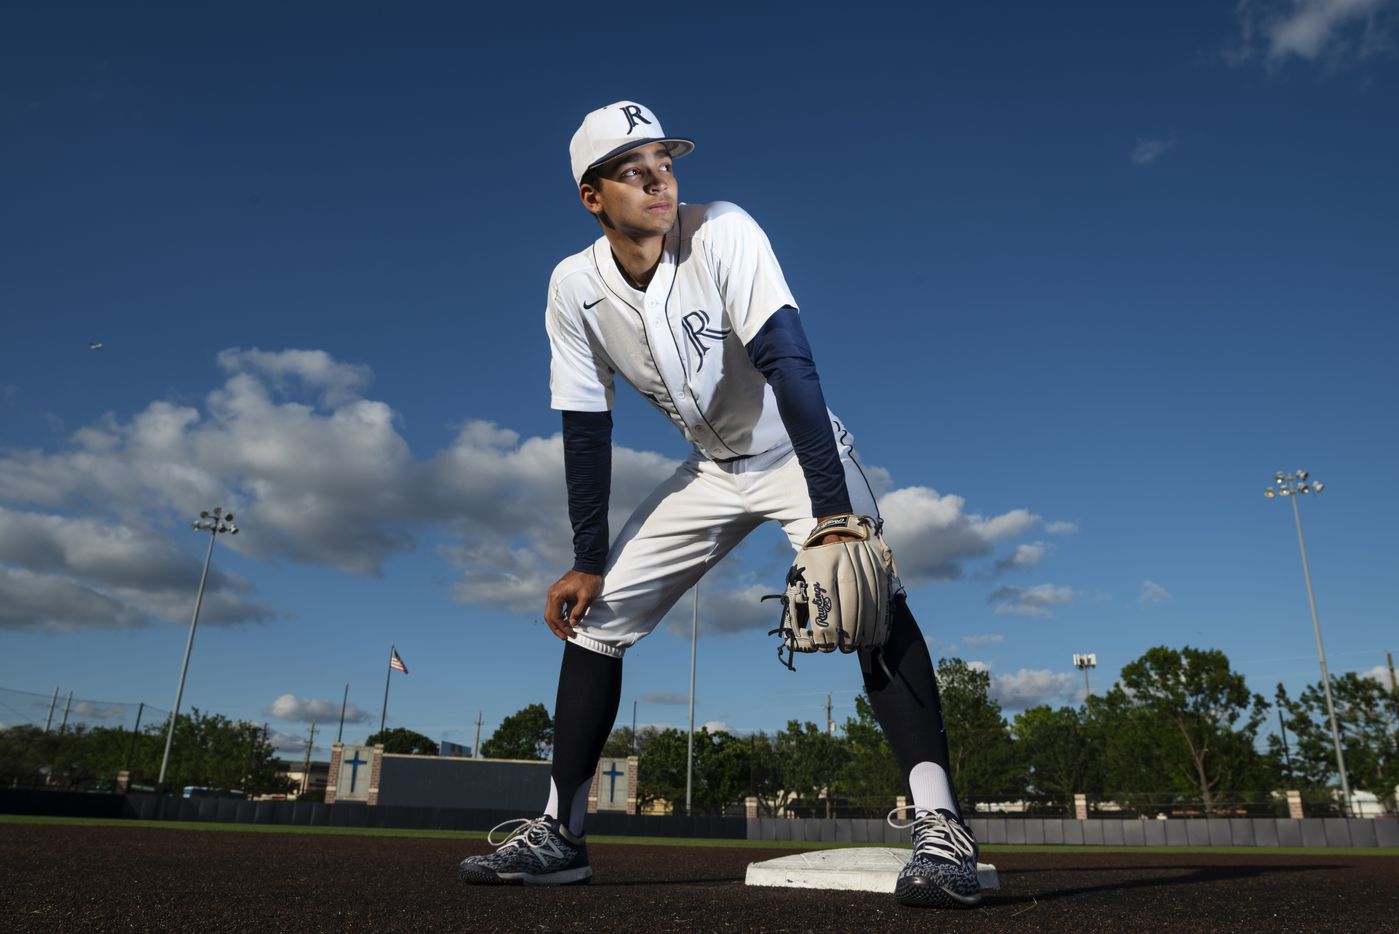 The Dallas Morning News' 2021 baseball Player of the Year